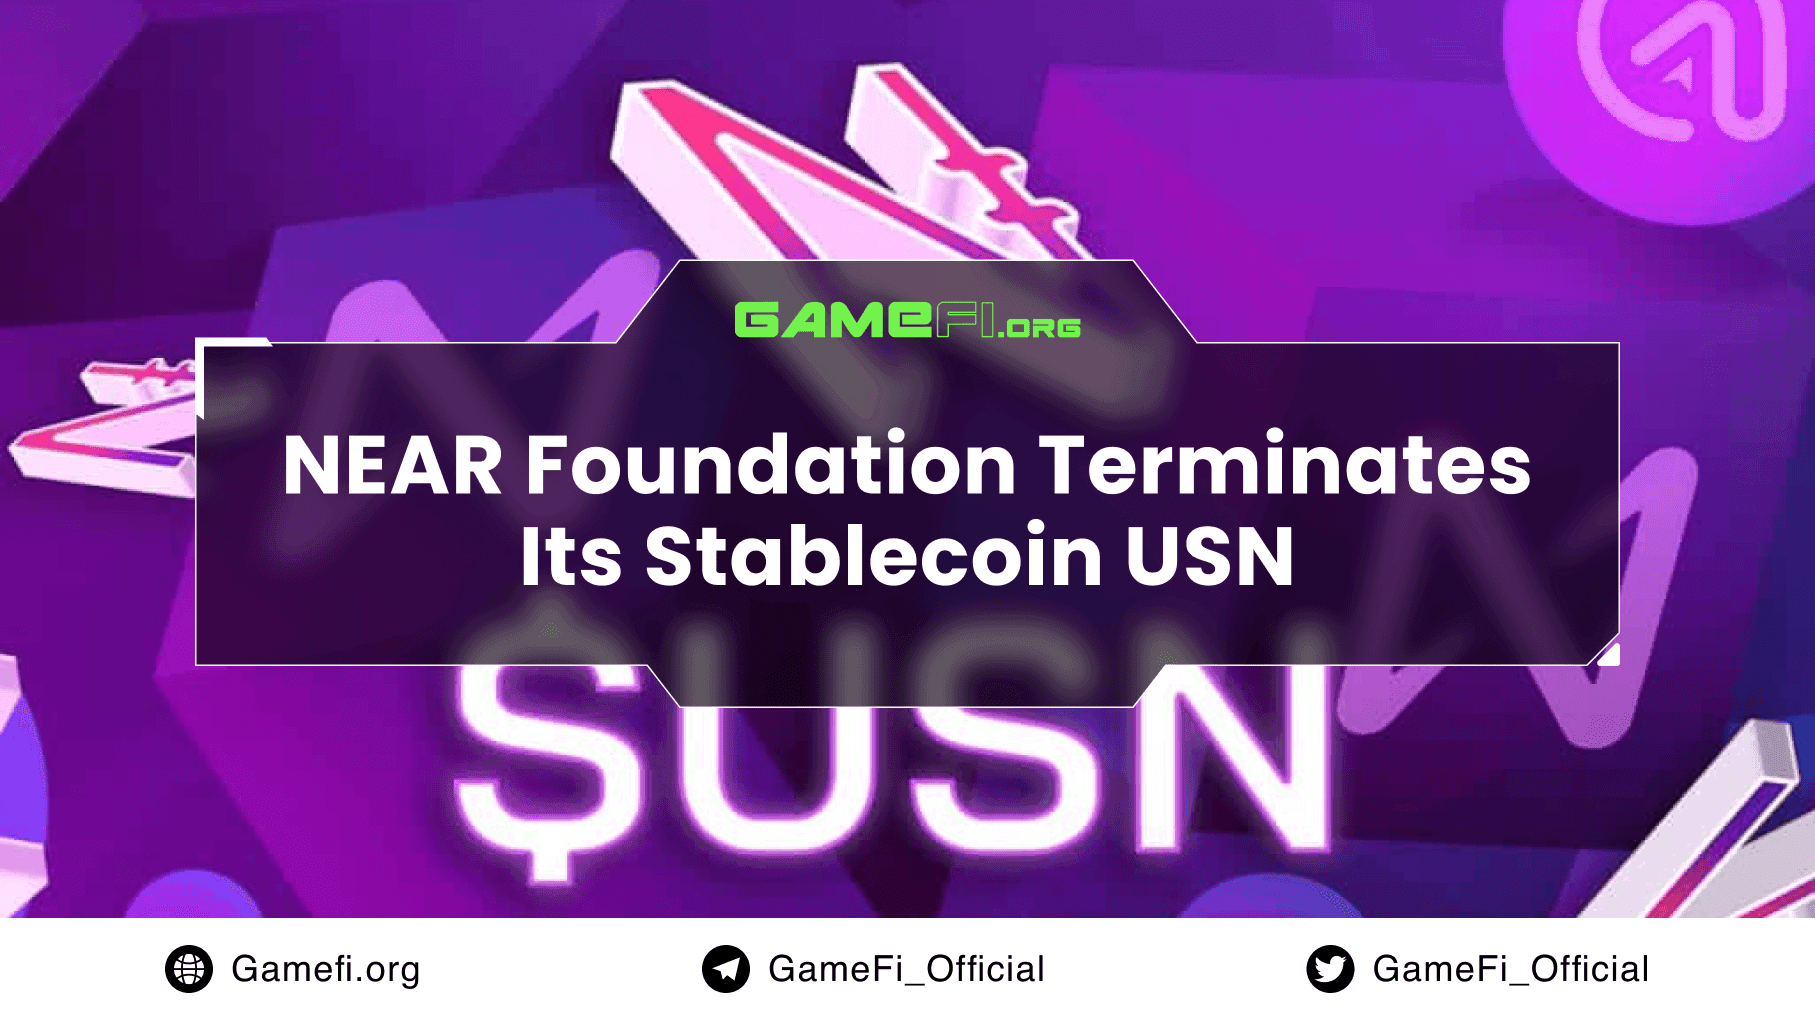 NEAR Foundation Terminates Its Stablecoin USN